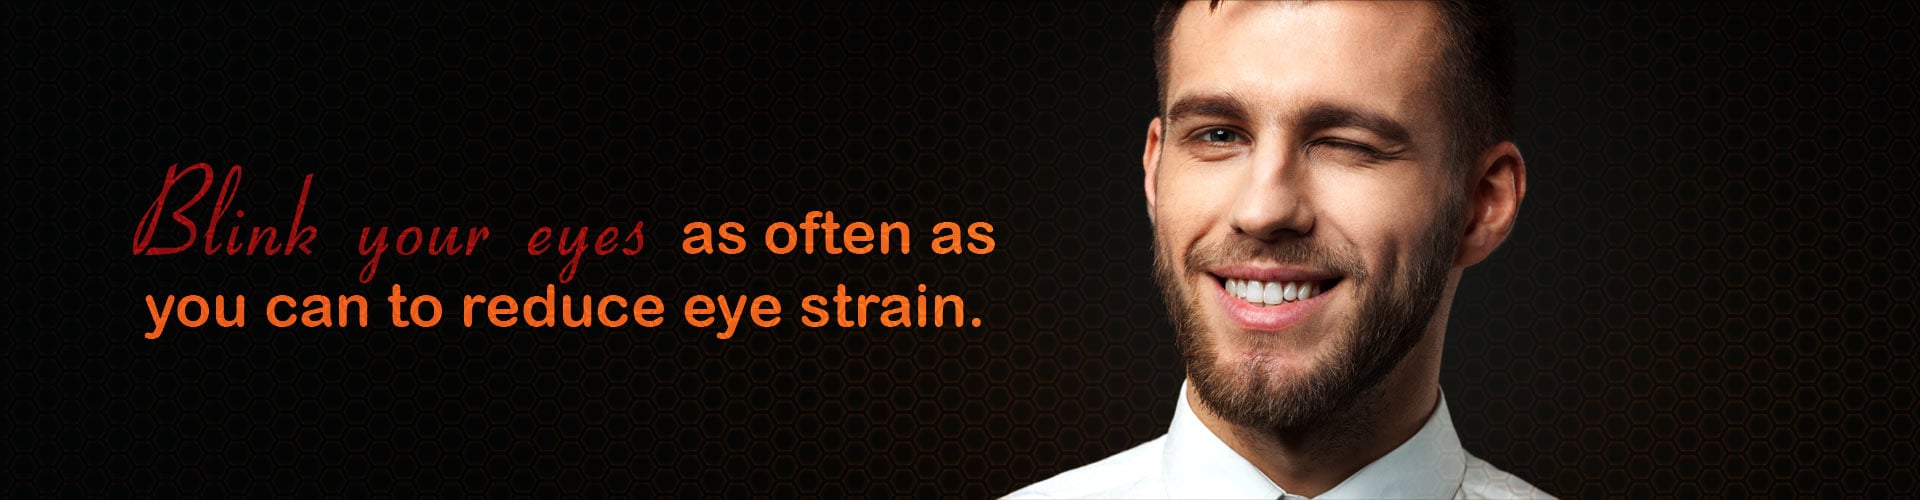 Blink your eyes as often as you can to reduce eye strain.